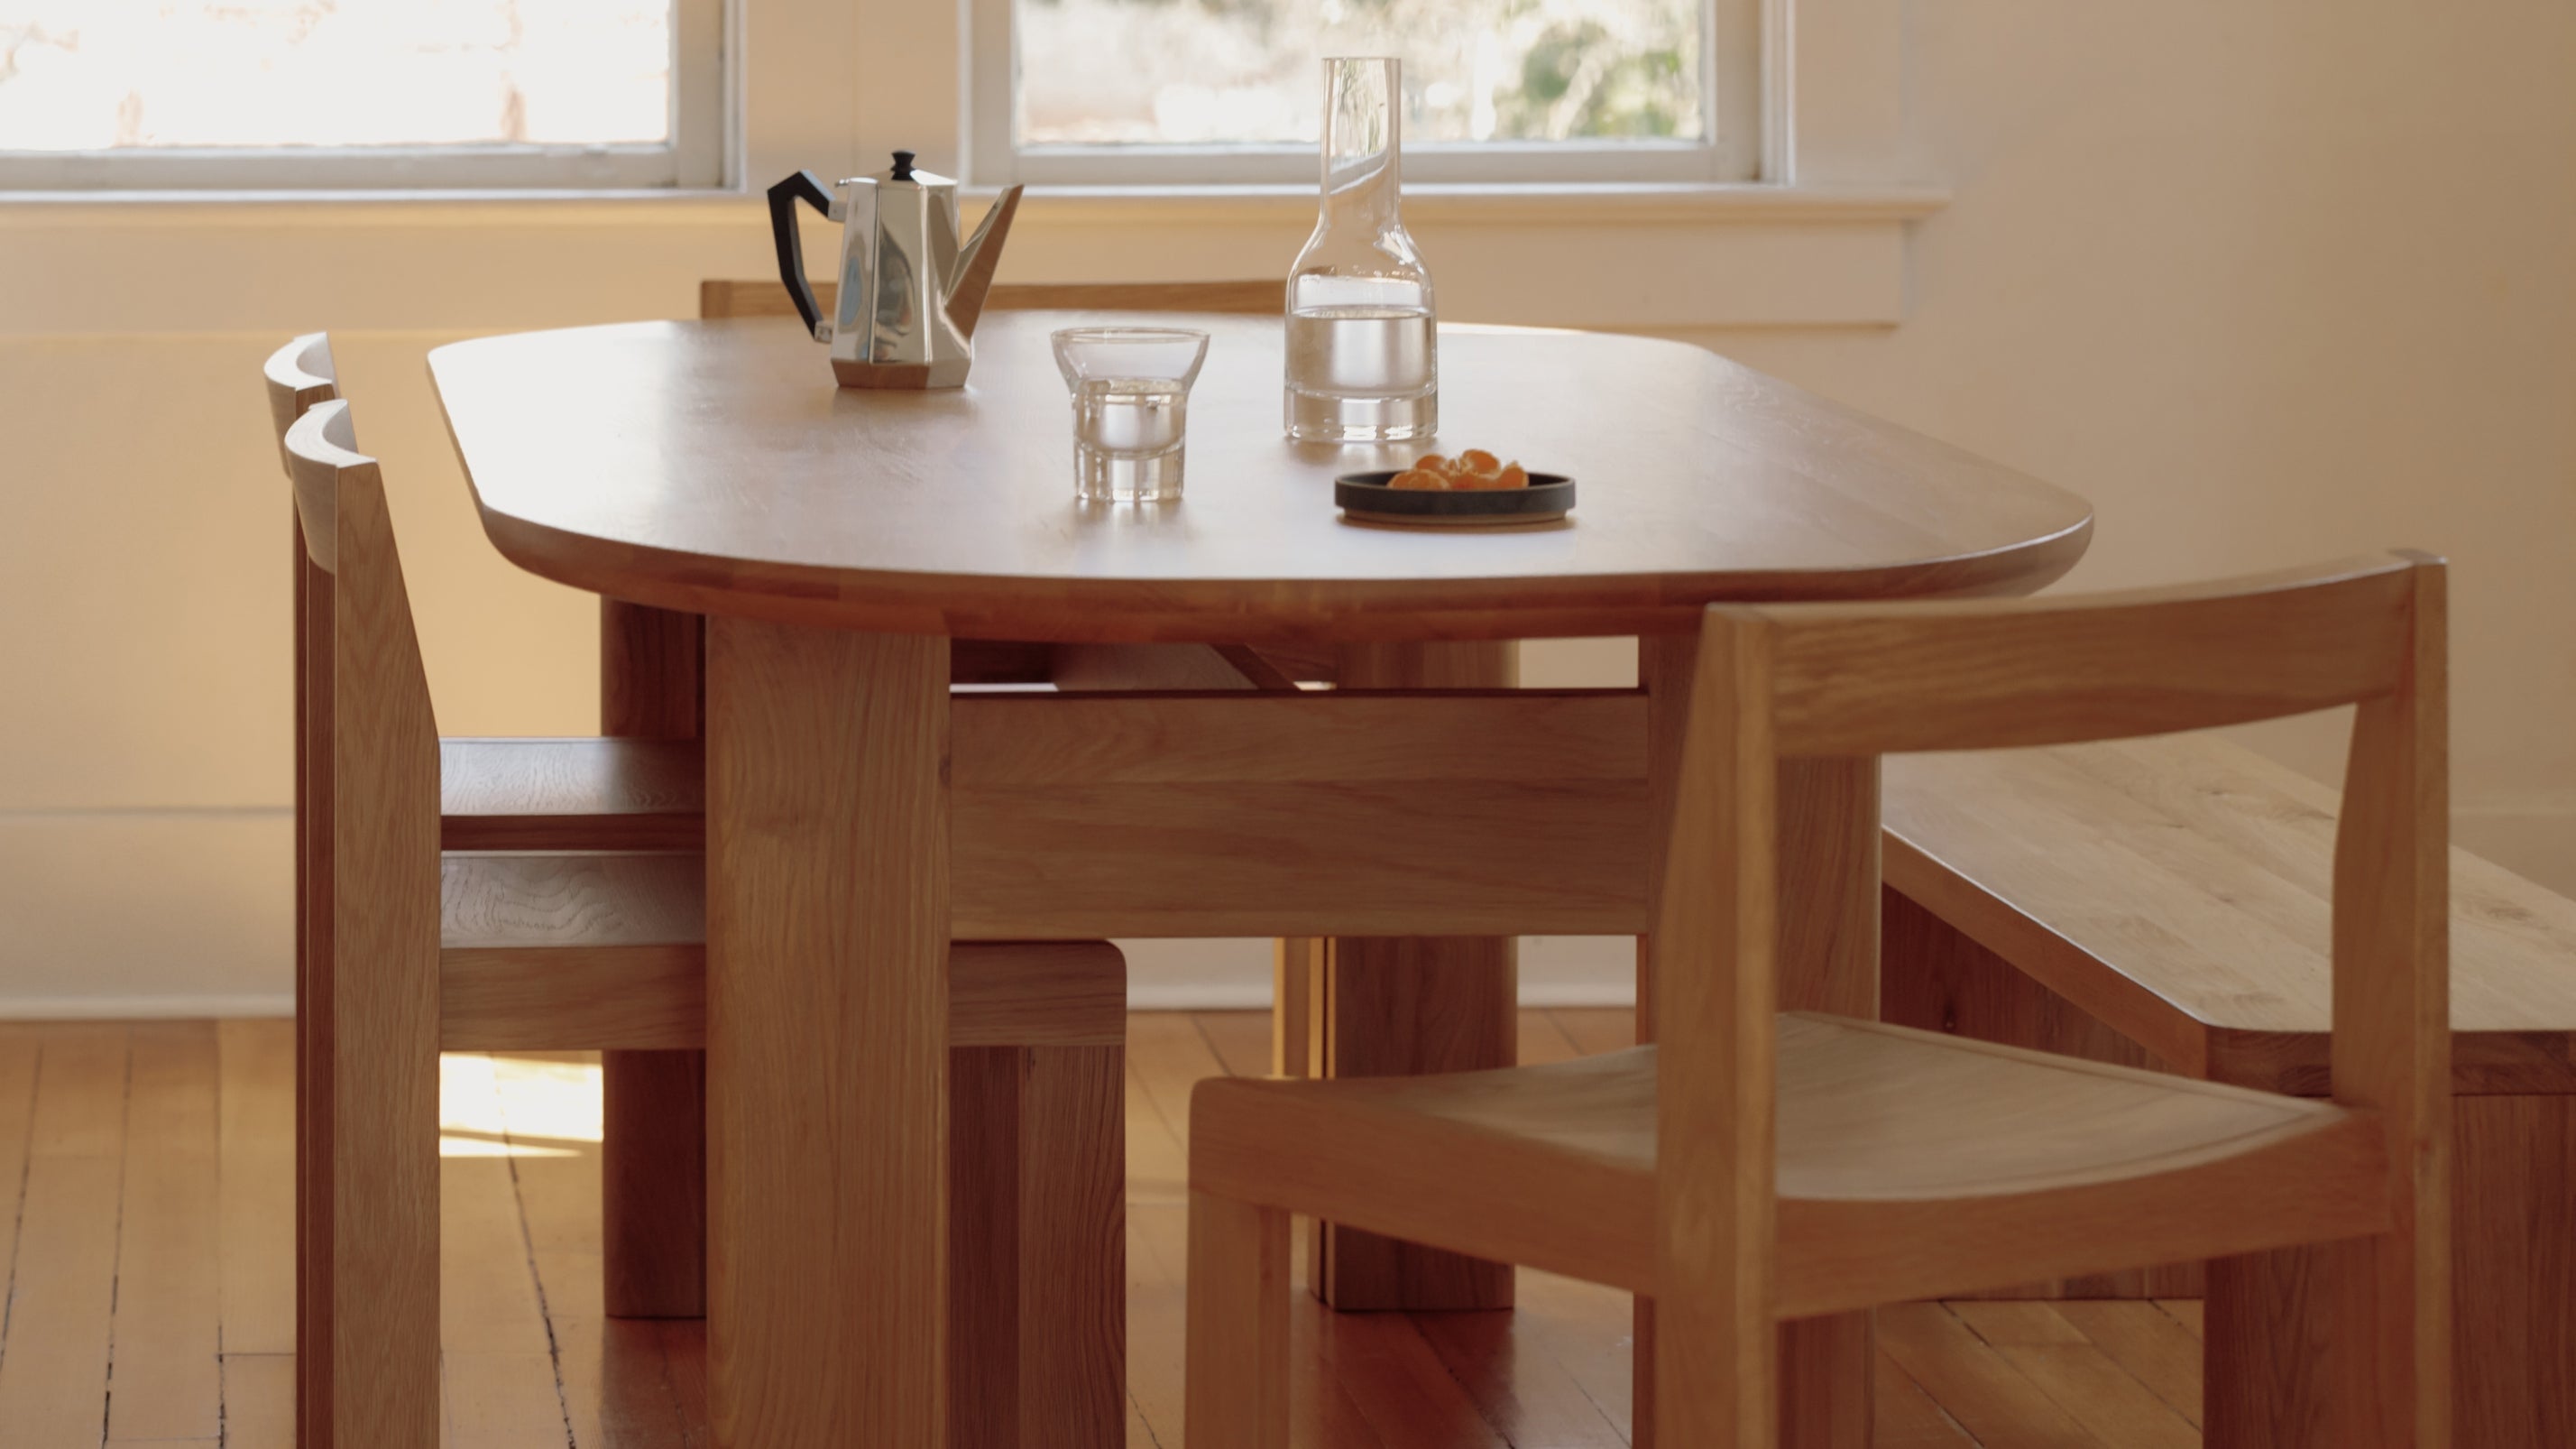 Track Dining Table, Seats 6-8 People, Oak - Image 3